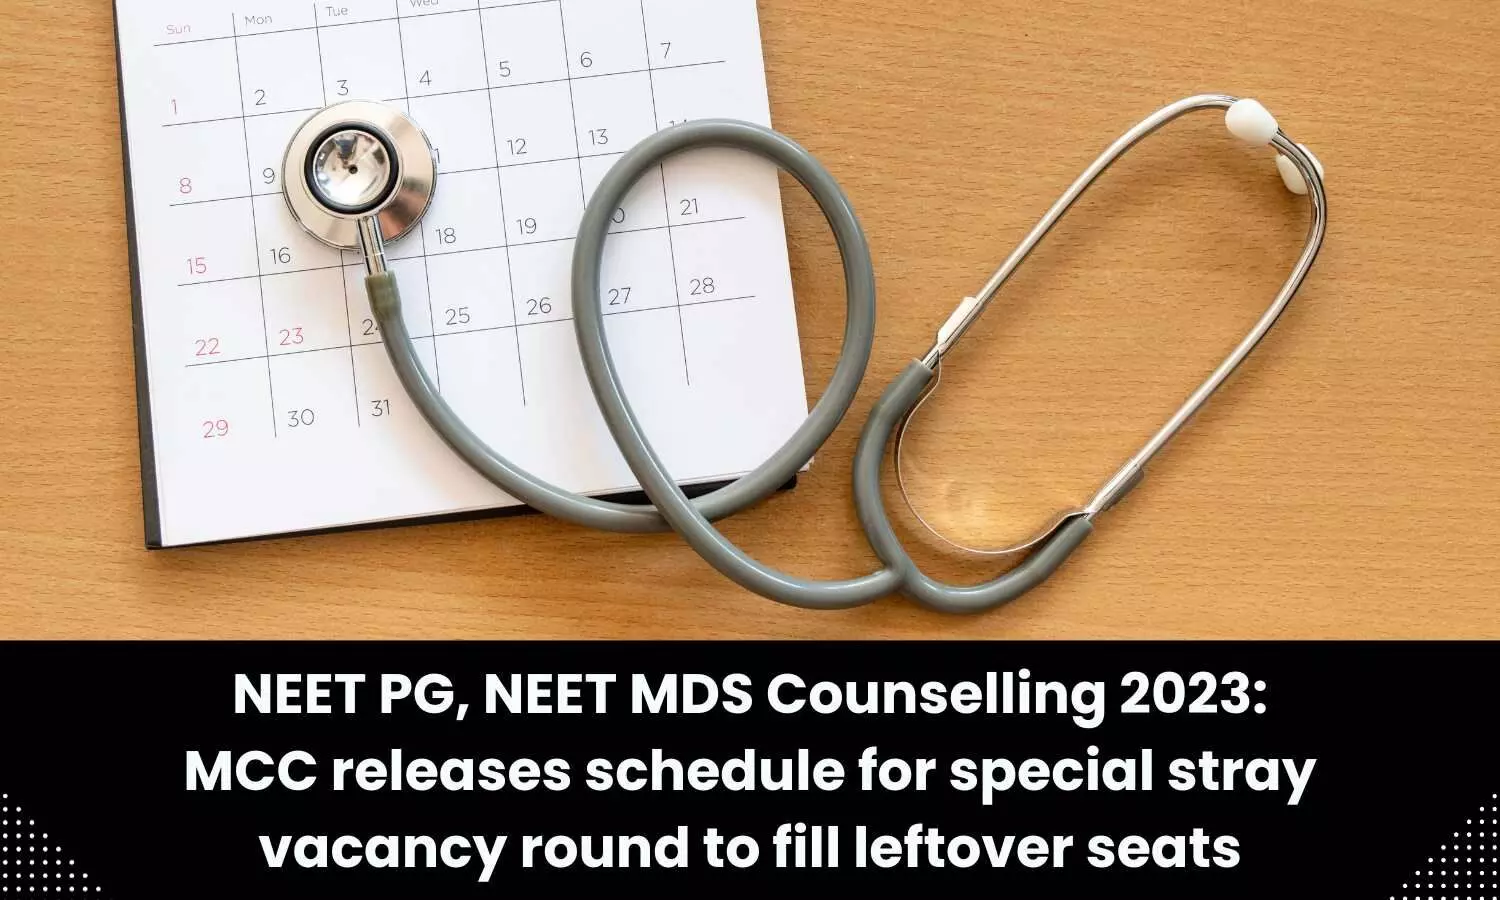 NEET MDS, NEET PG Counselling 2023: MCC announces schedule for special stray vacancy round to fill leftover seats